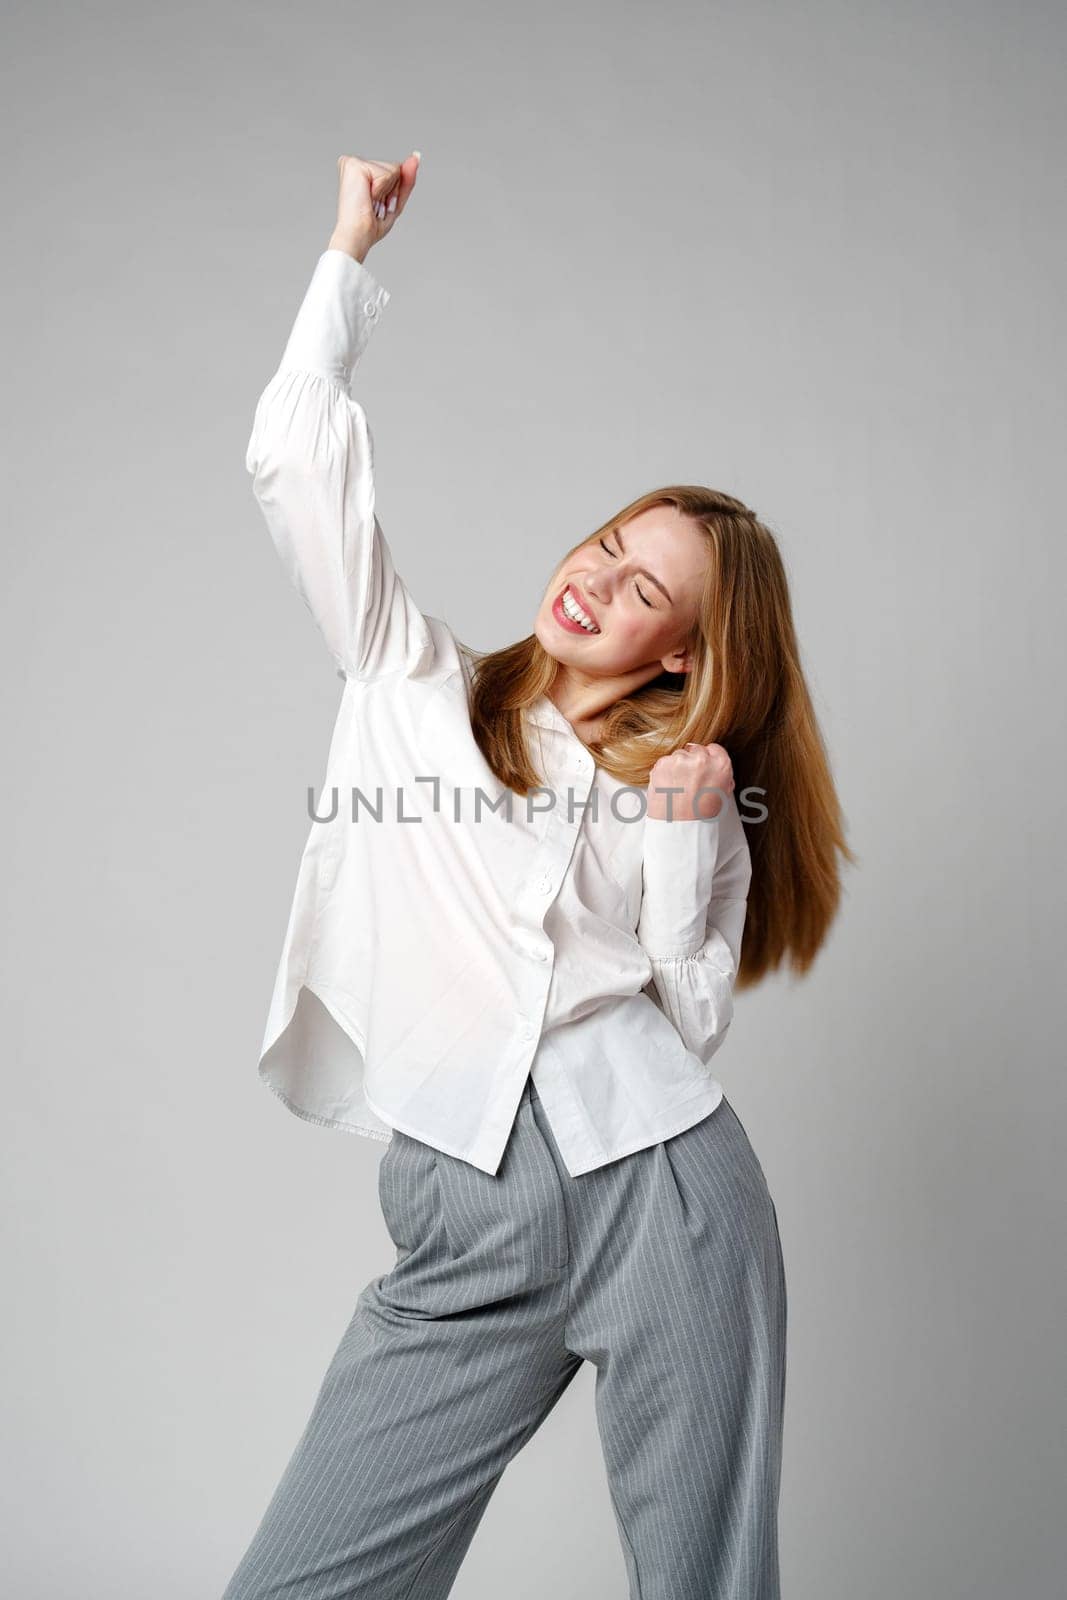 Jubilant Young Woman Celebrating a Victory With a Raised Fist in Studio by Fabrikasimf